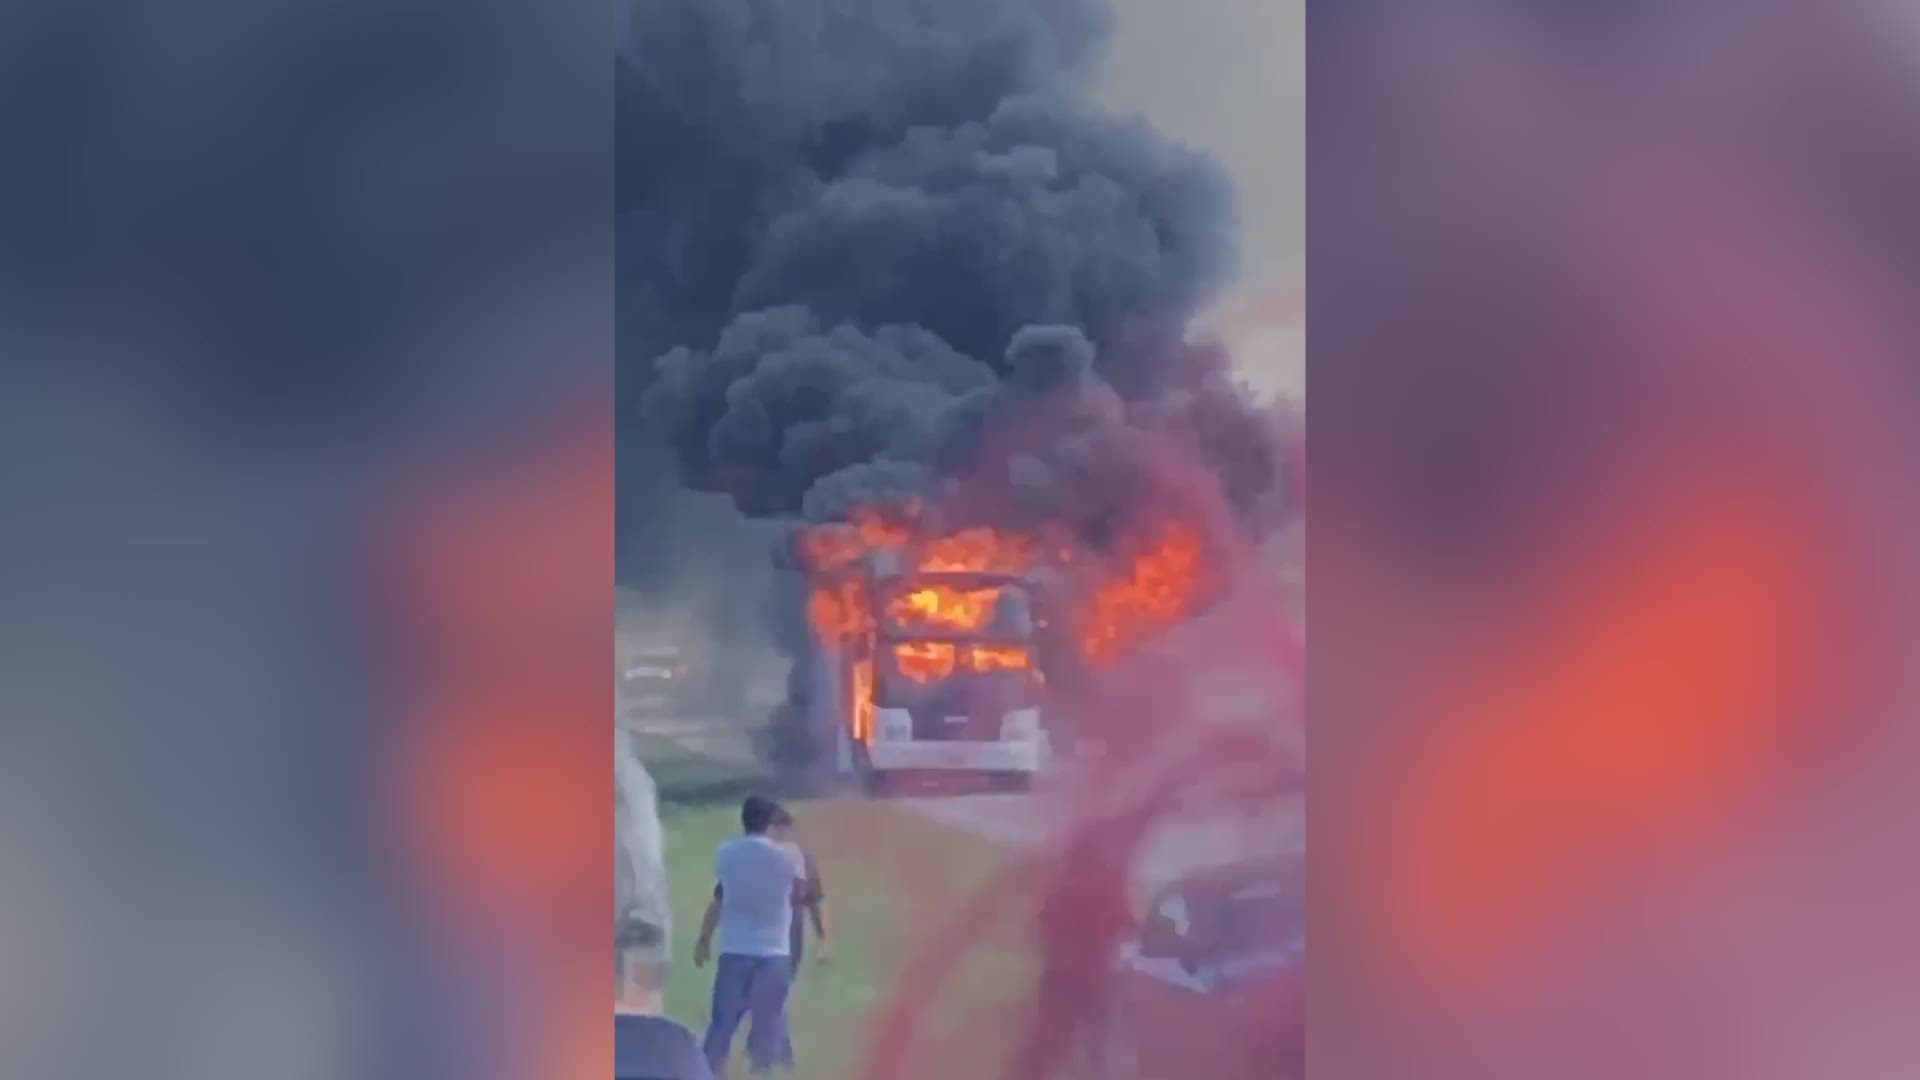 Family members of campers say a bus exploded in the Marble Falls area. The bus was carrying campers from the San Antonio area back home.